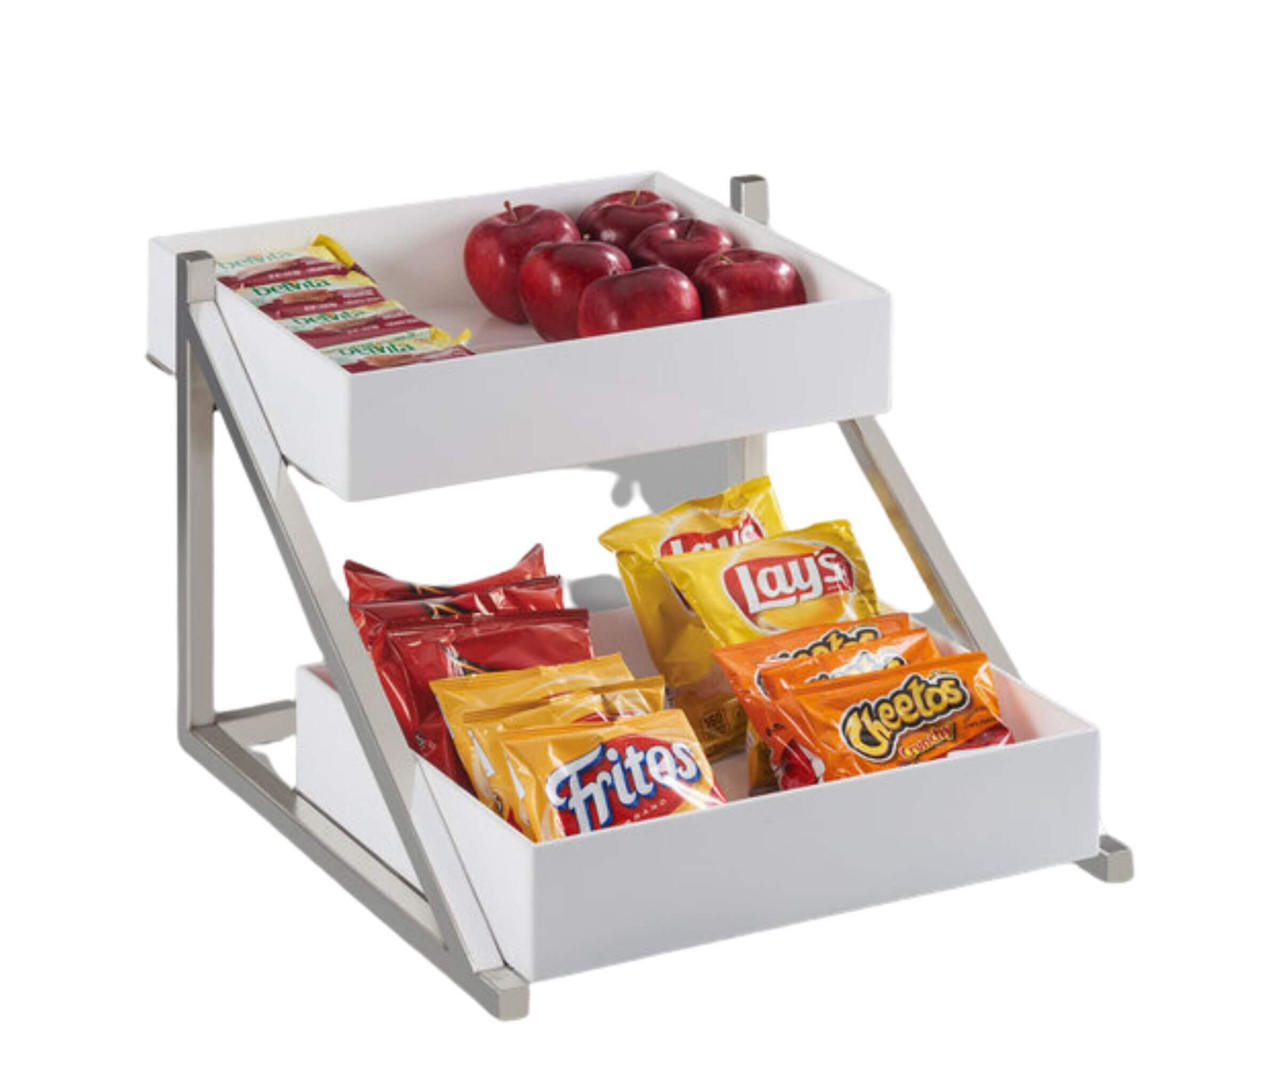  Cal-Mil Luxe 2-Tier Offset Merchandiser - 20 3/4" x 15 1/2" x 12 3/4" - Contemporary Display Stand 